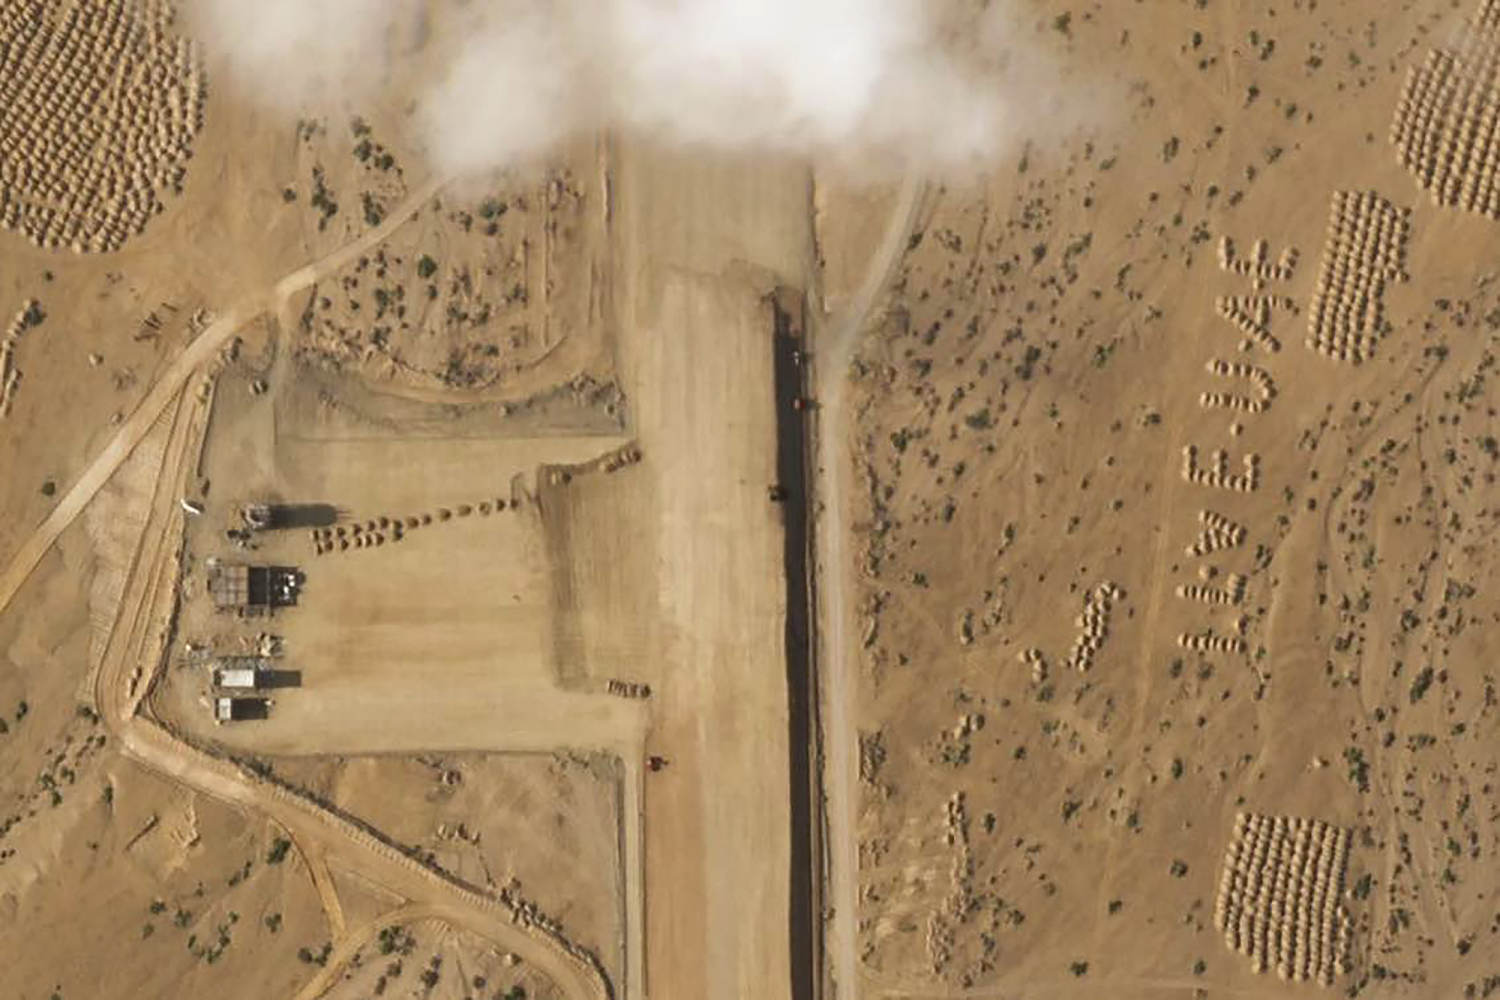 An airstrip is being built on a Yemeni island near the Red Sea with ‘I LOVE UAE’ next to it